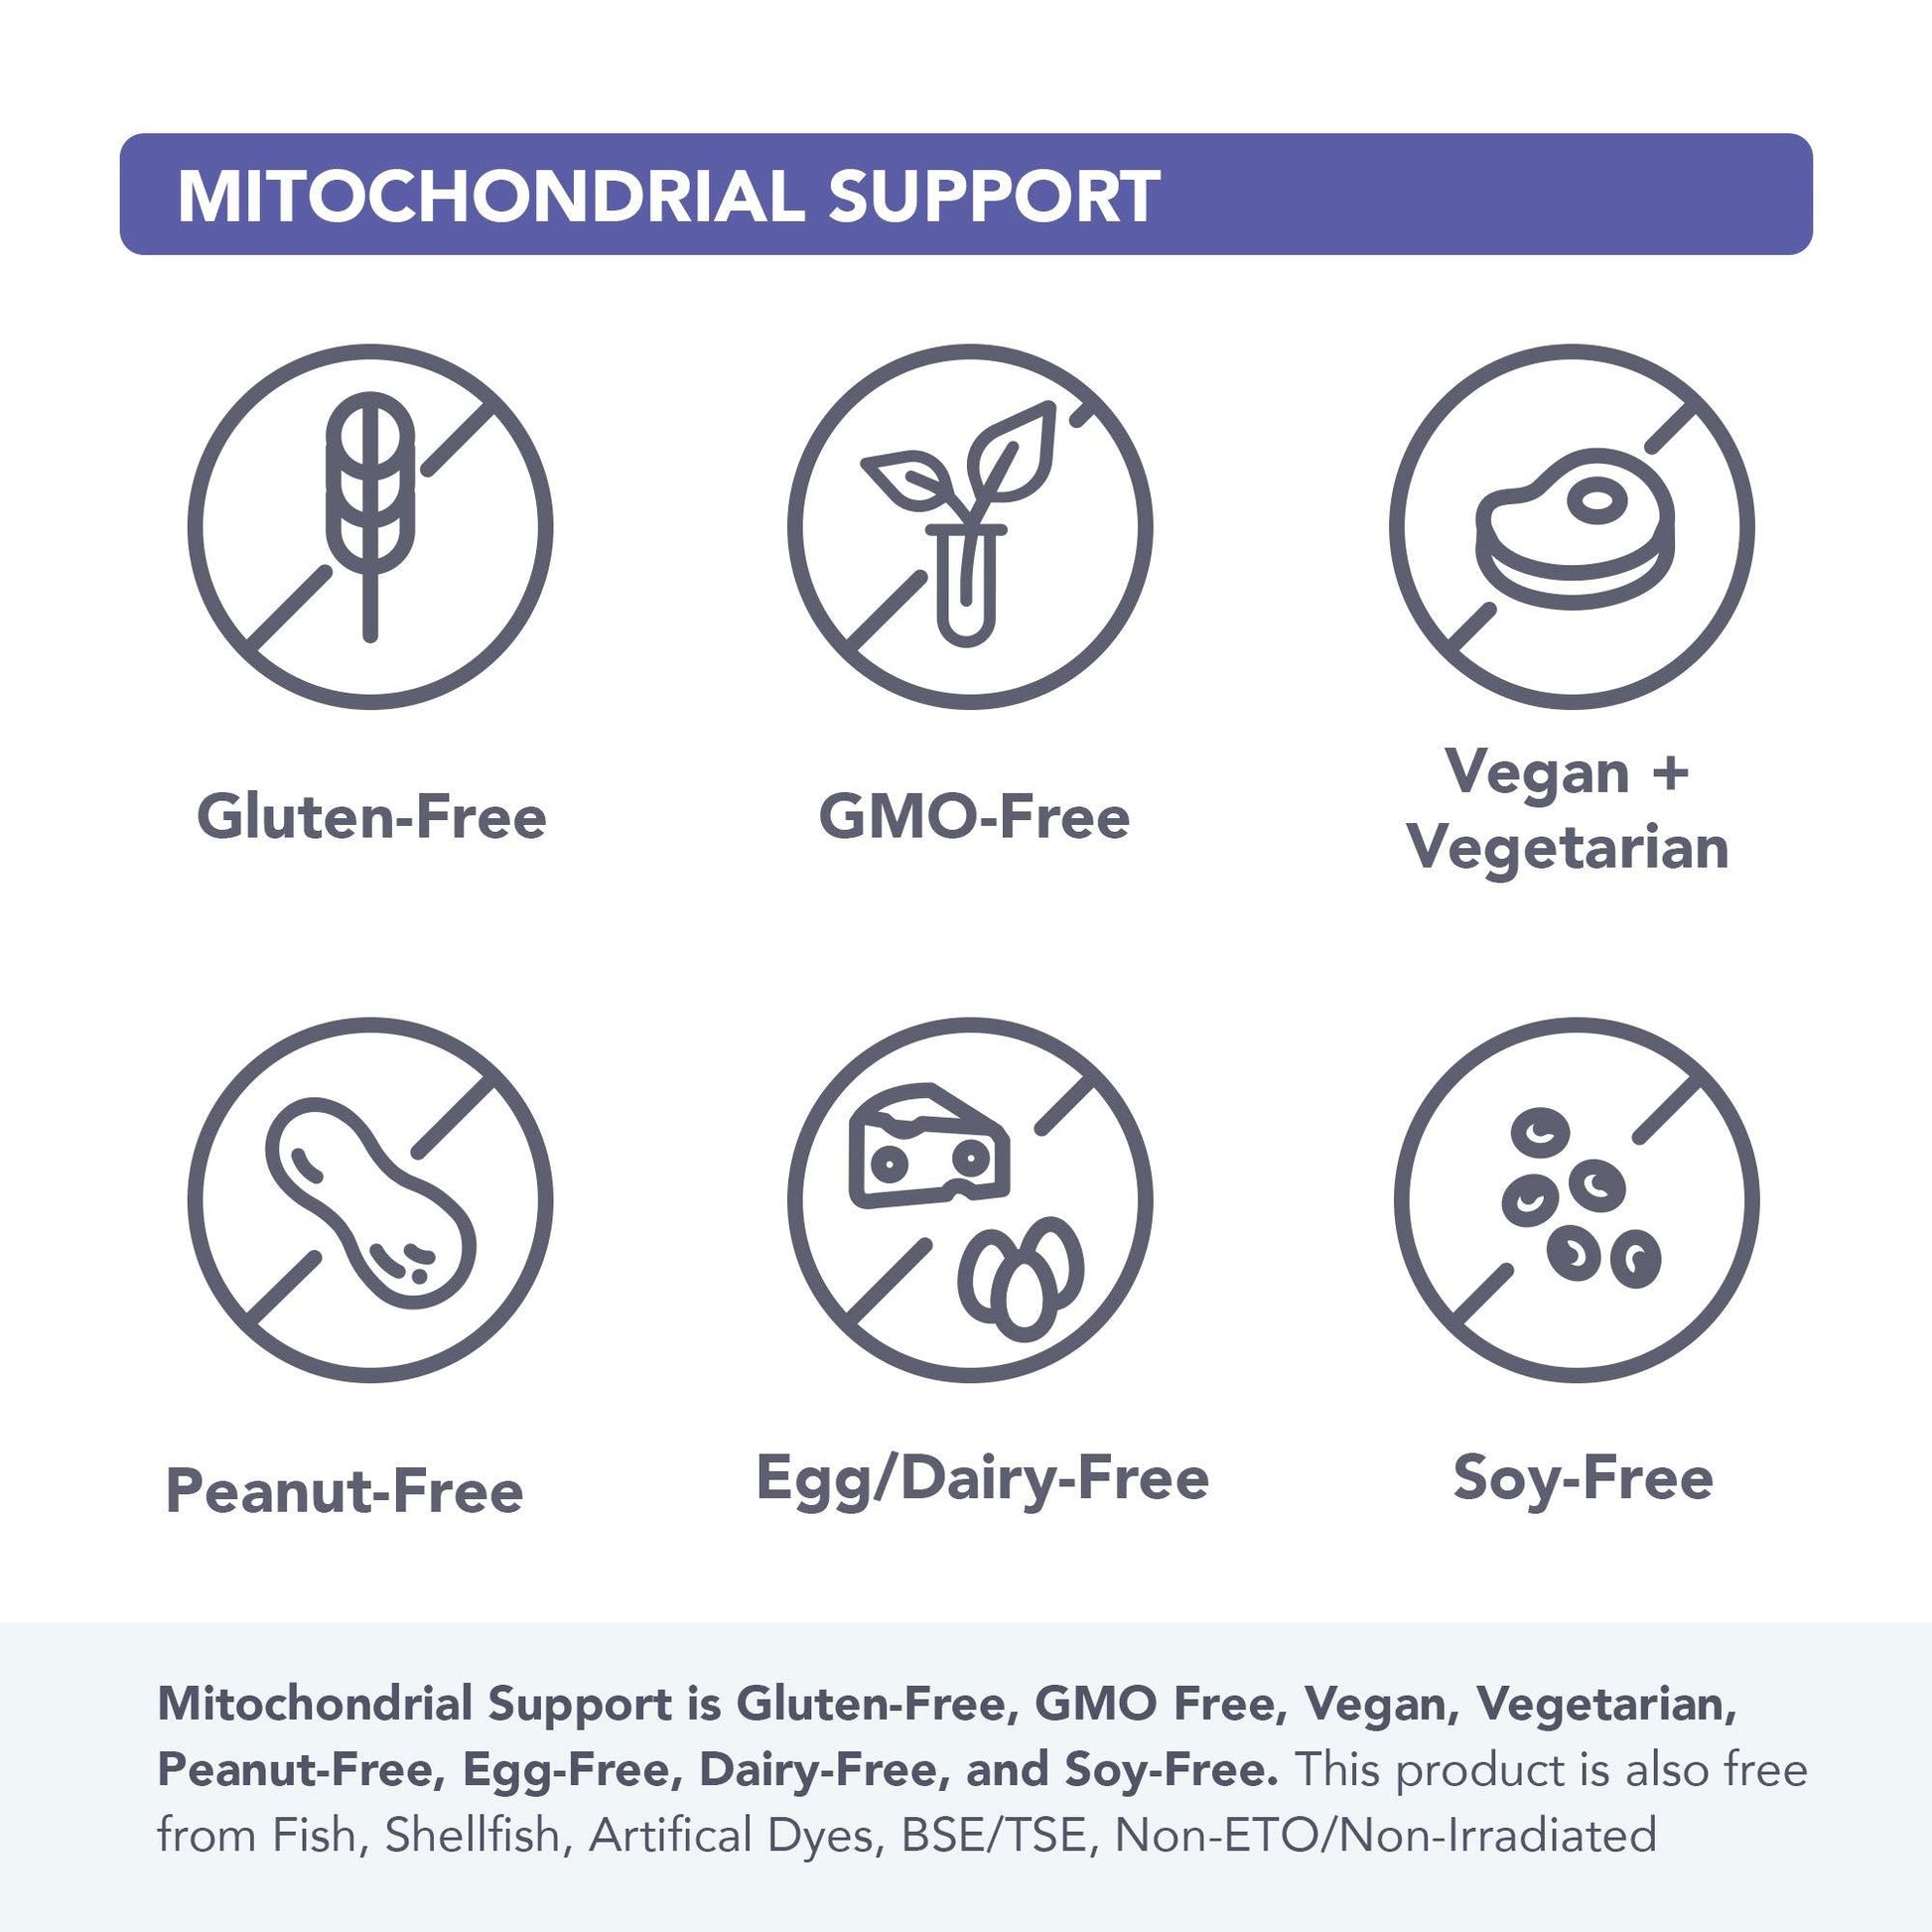 Mitochondrial Support - Vital Plan